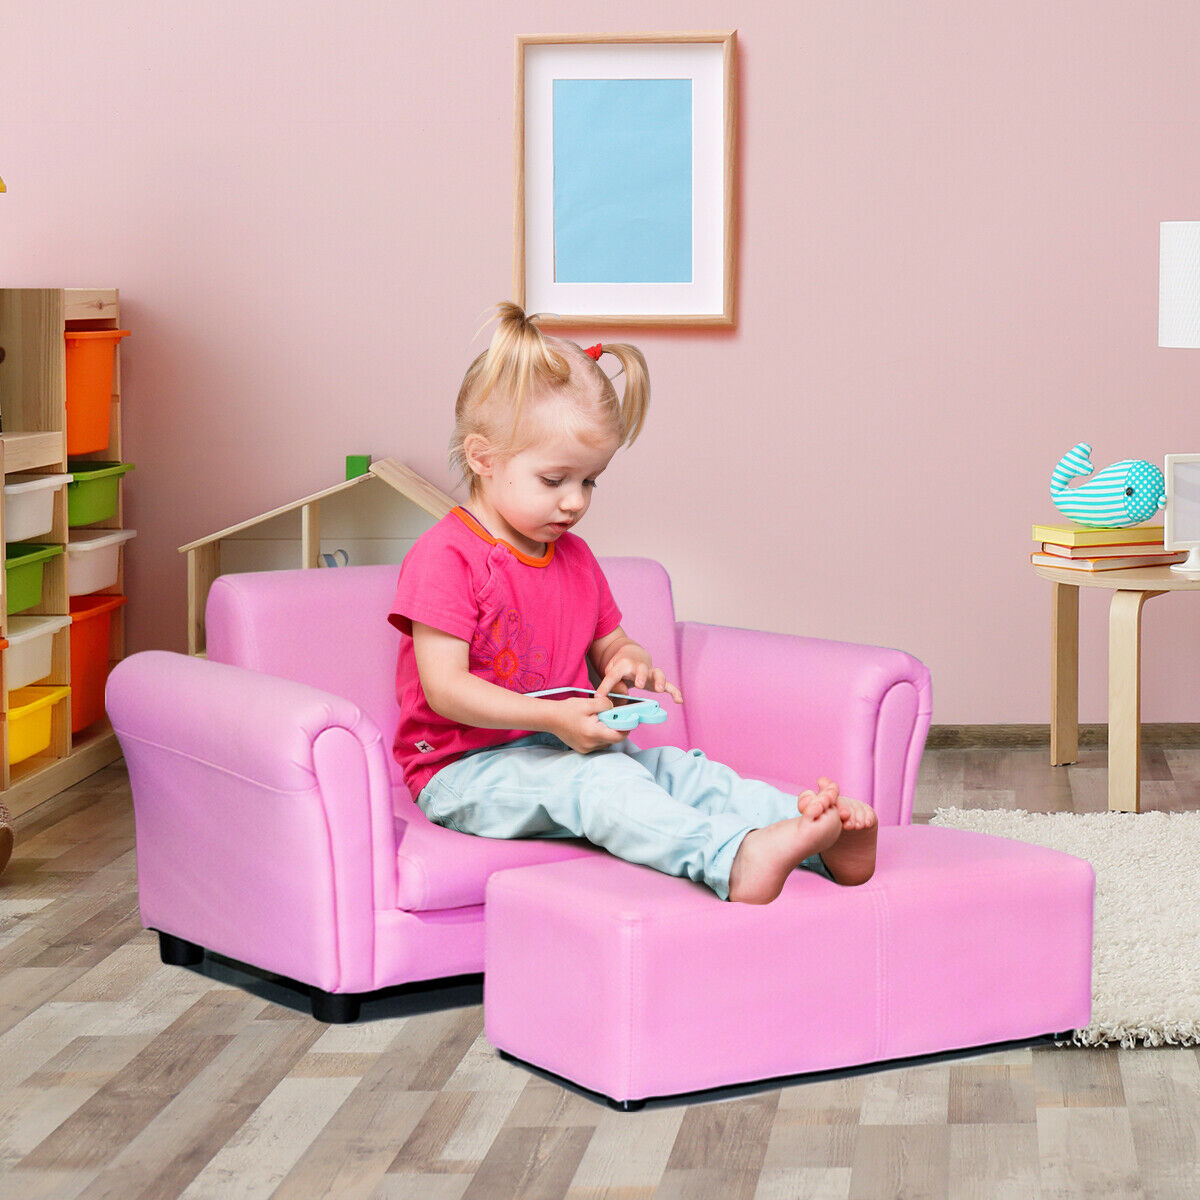 kmart childrens couch